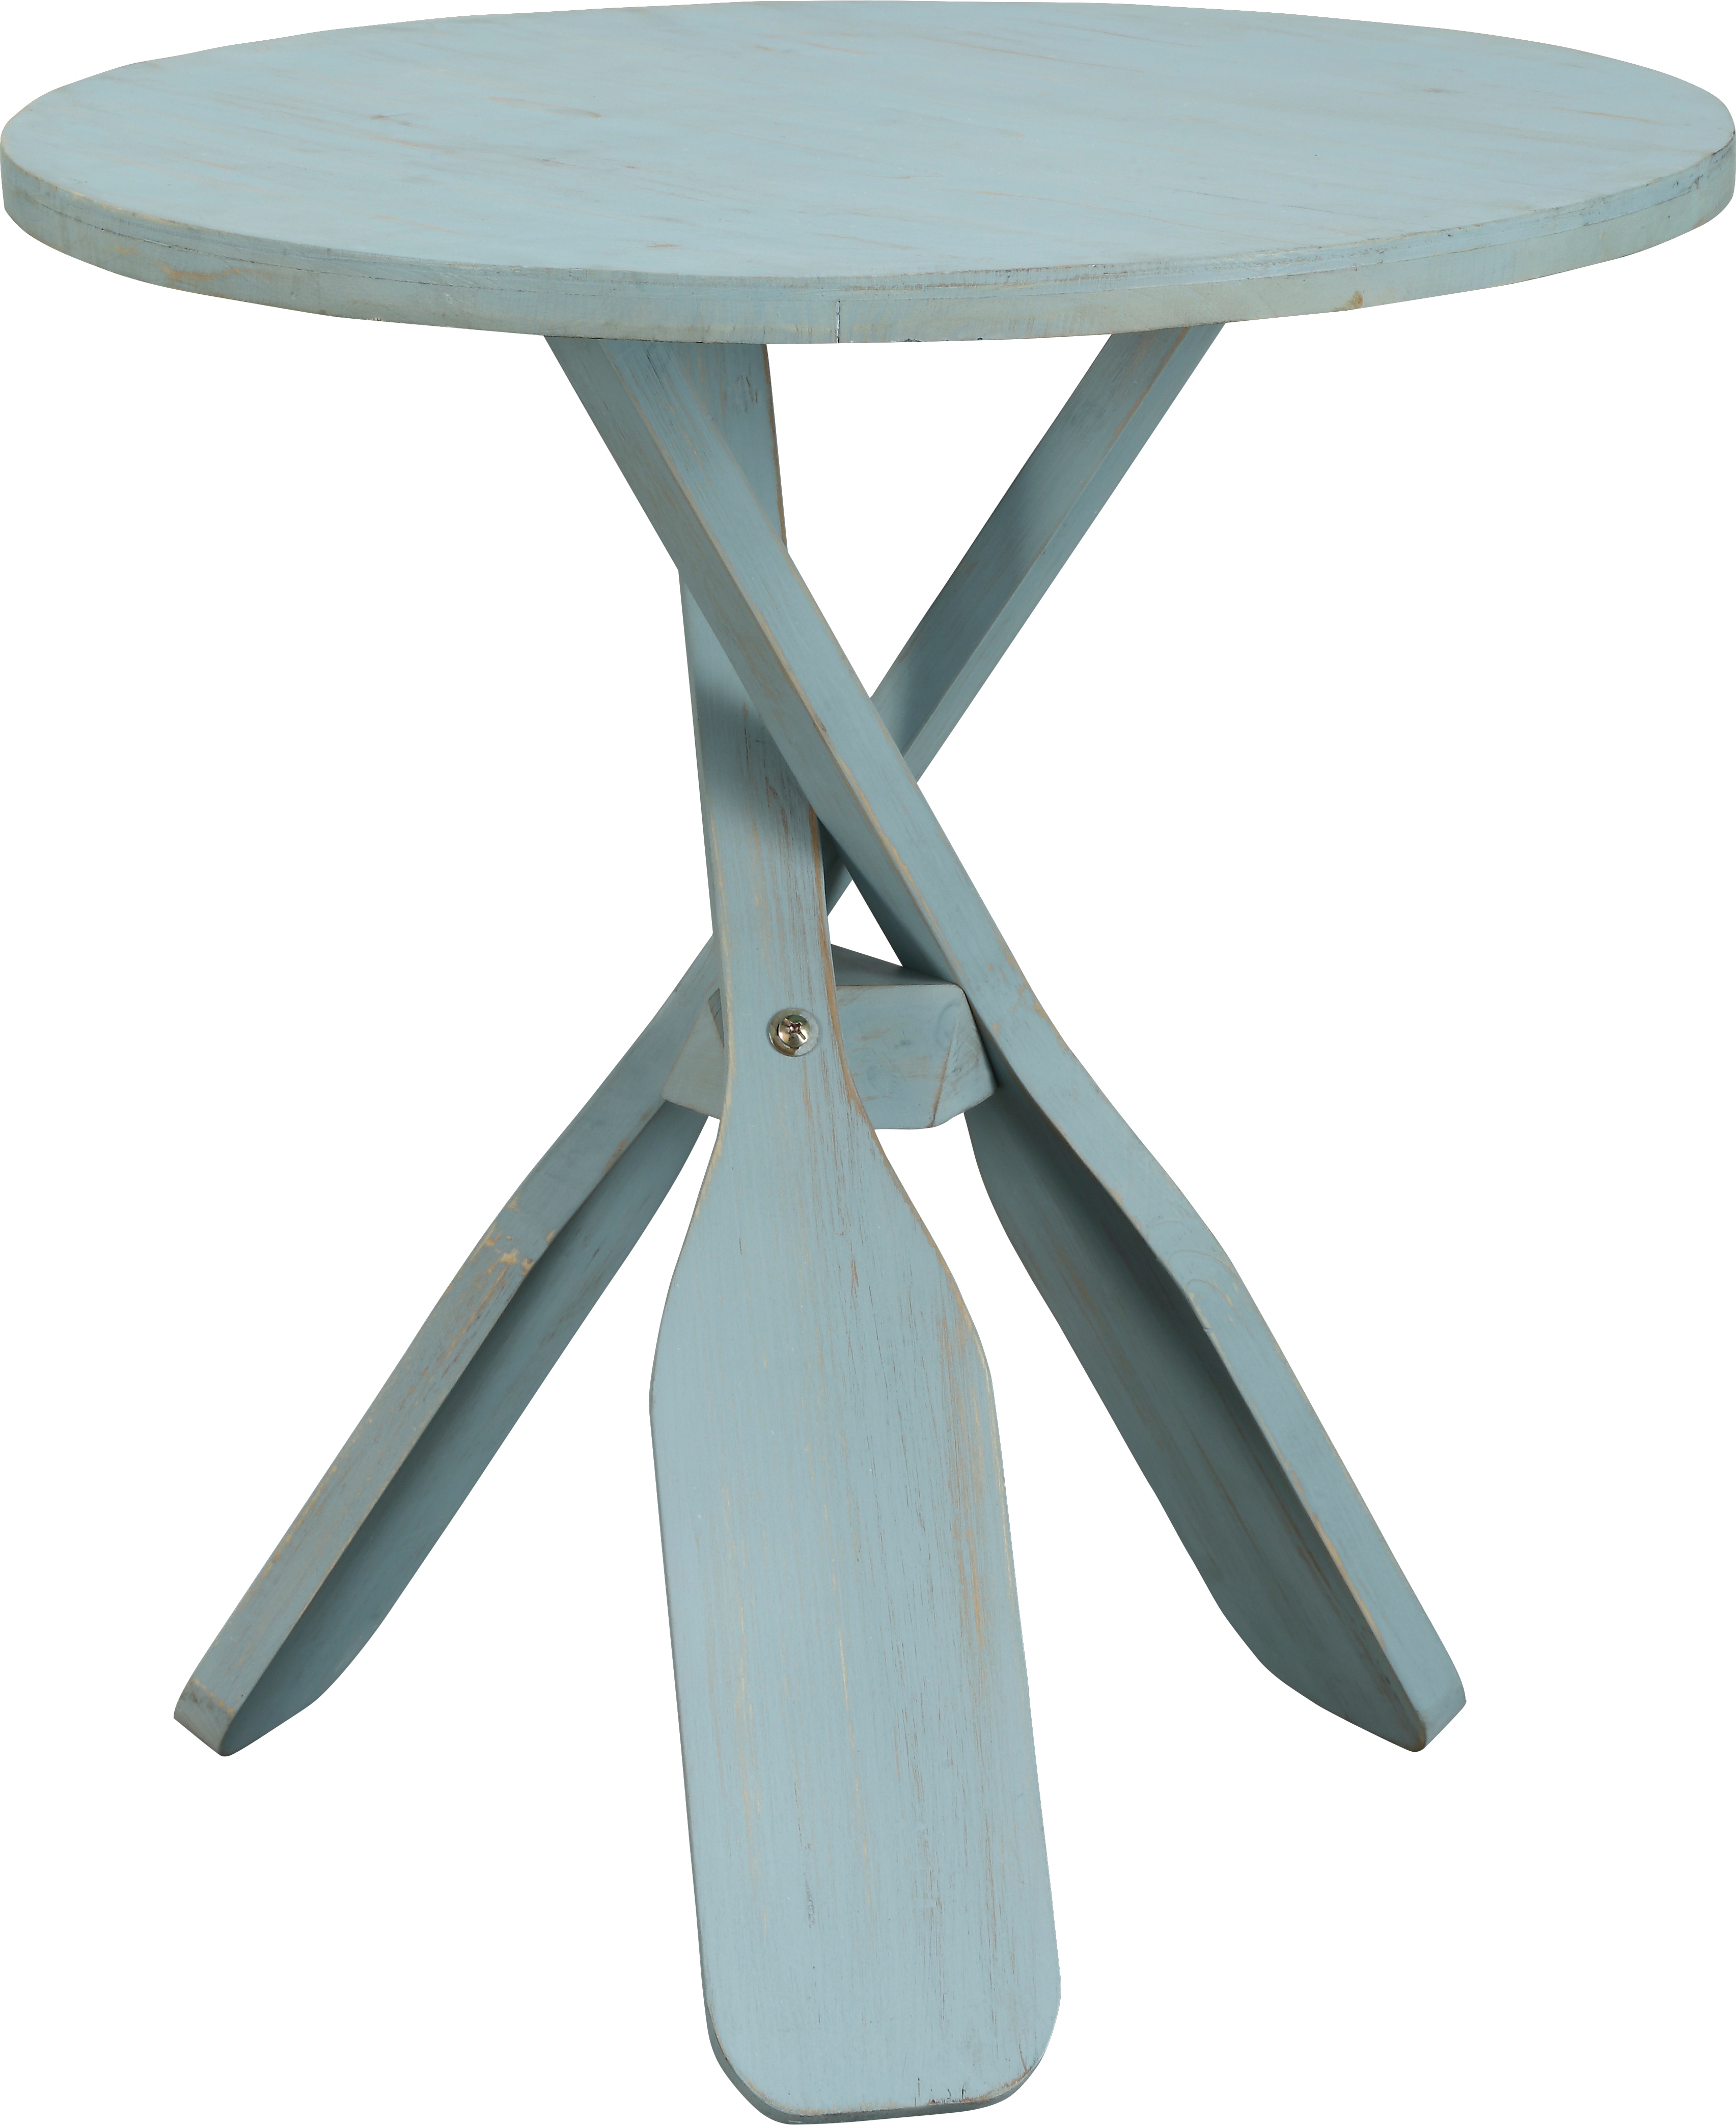 triple paddle blue accent table tables colors triplepaddle teal glass top end small mirrored nightstand turquoise sofa tread plates wooden door thresholds rustic entry big square